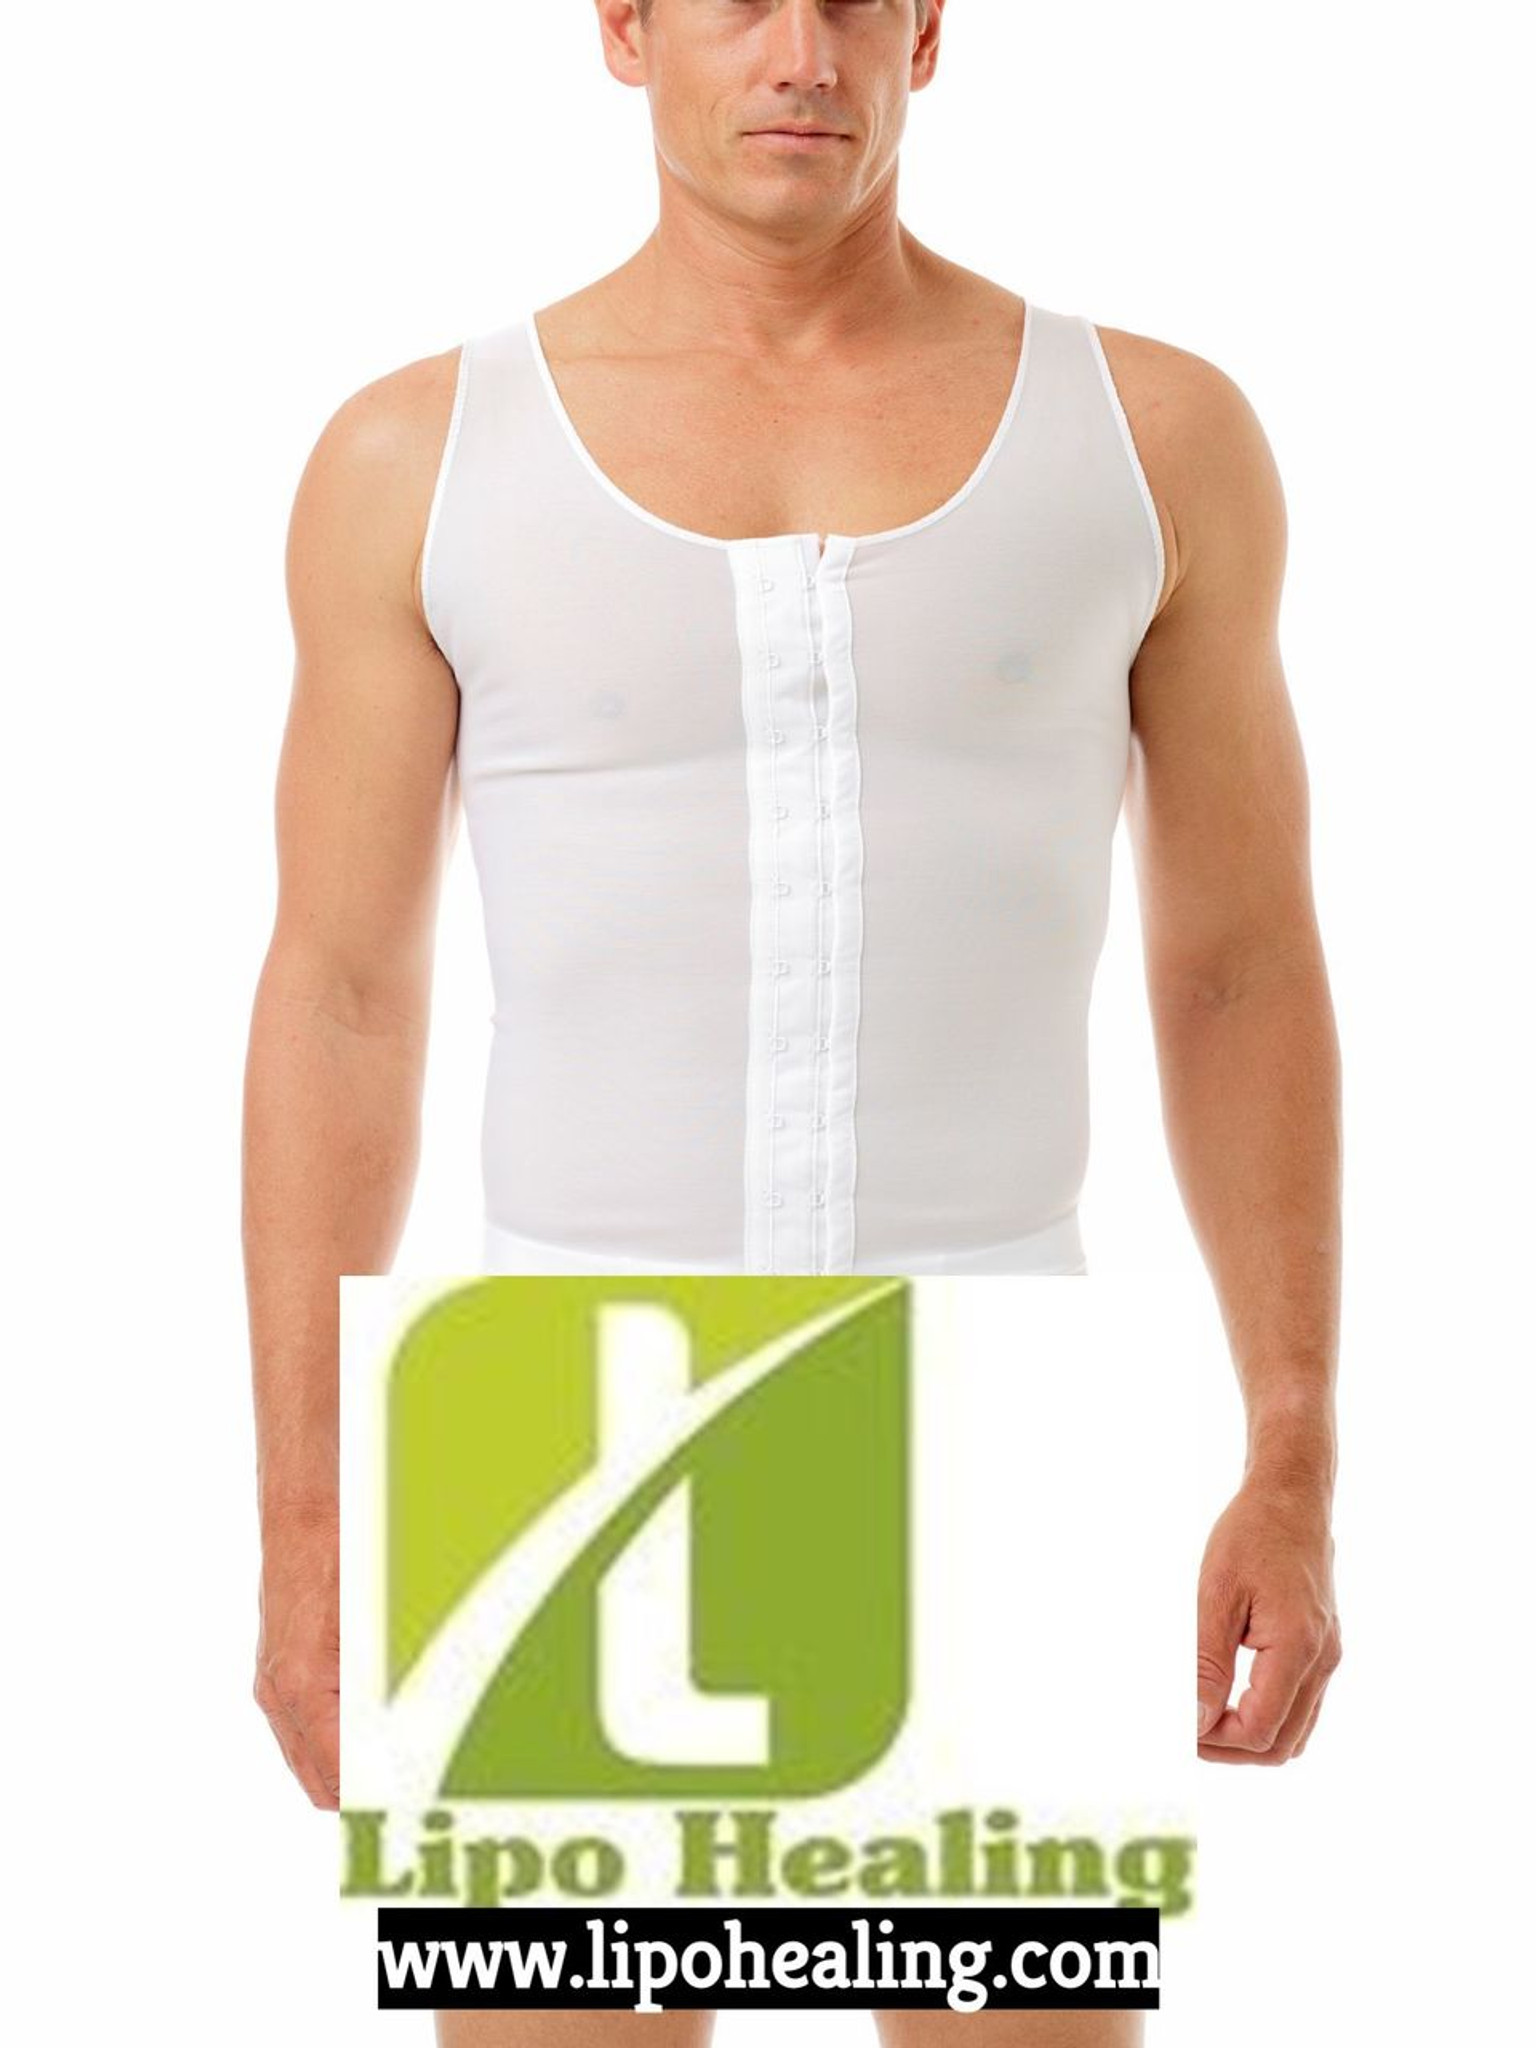 2nd Stage Male Abdominal Cosmetic Surgery Compression Vest MADE IN